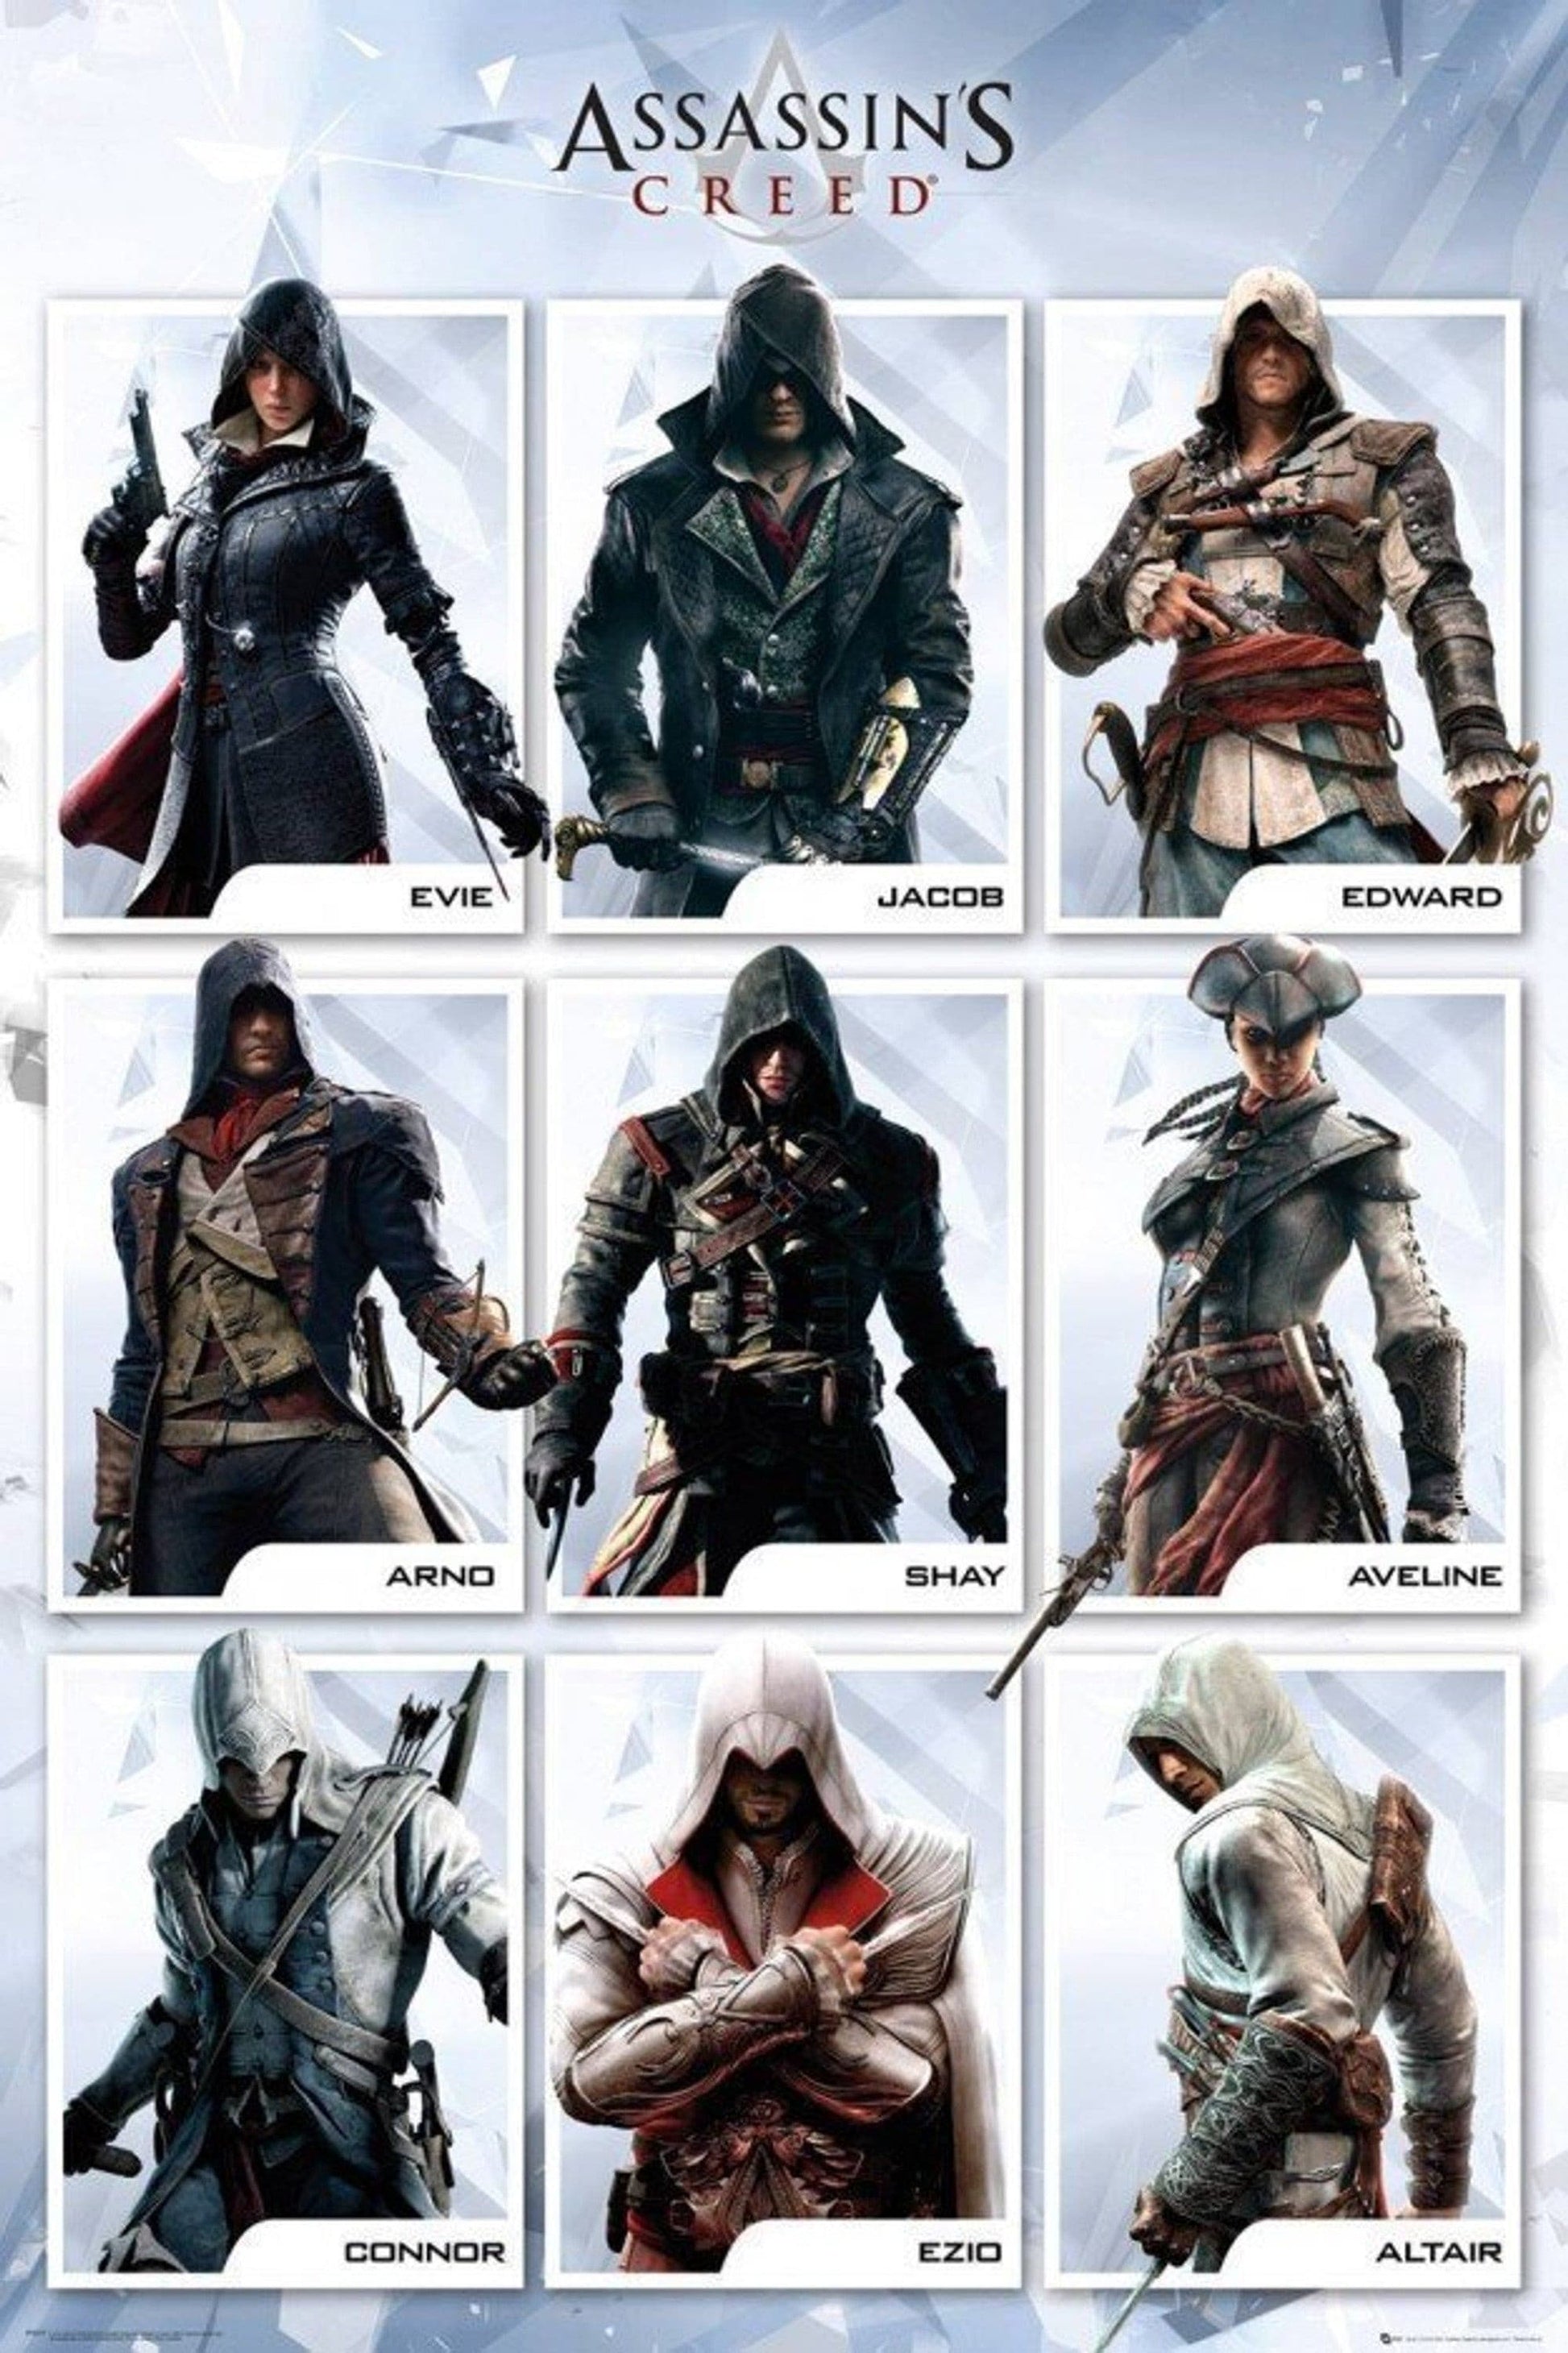 Assassin's Creed - Poster.